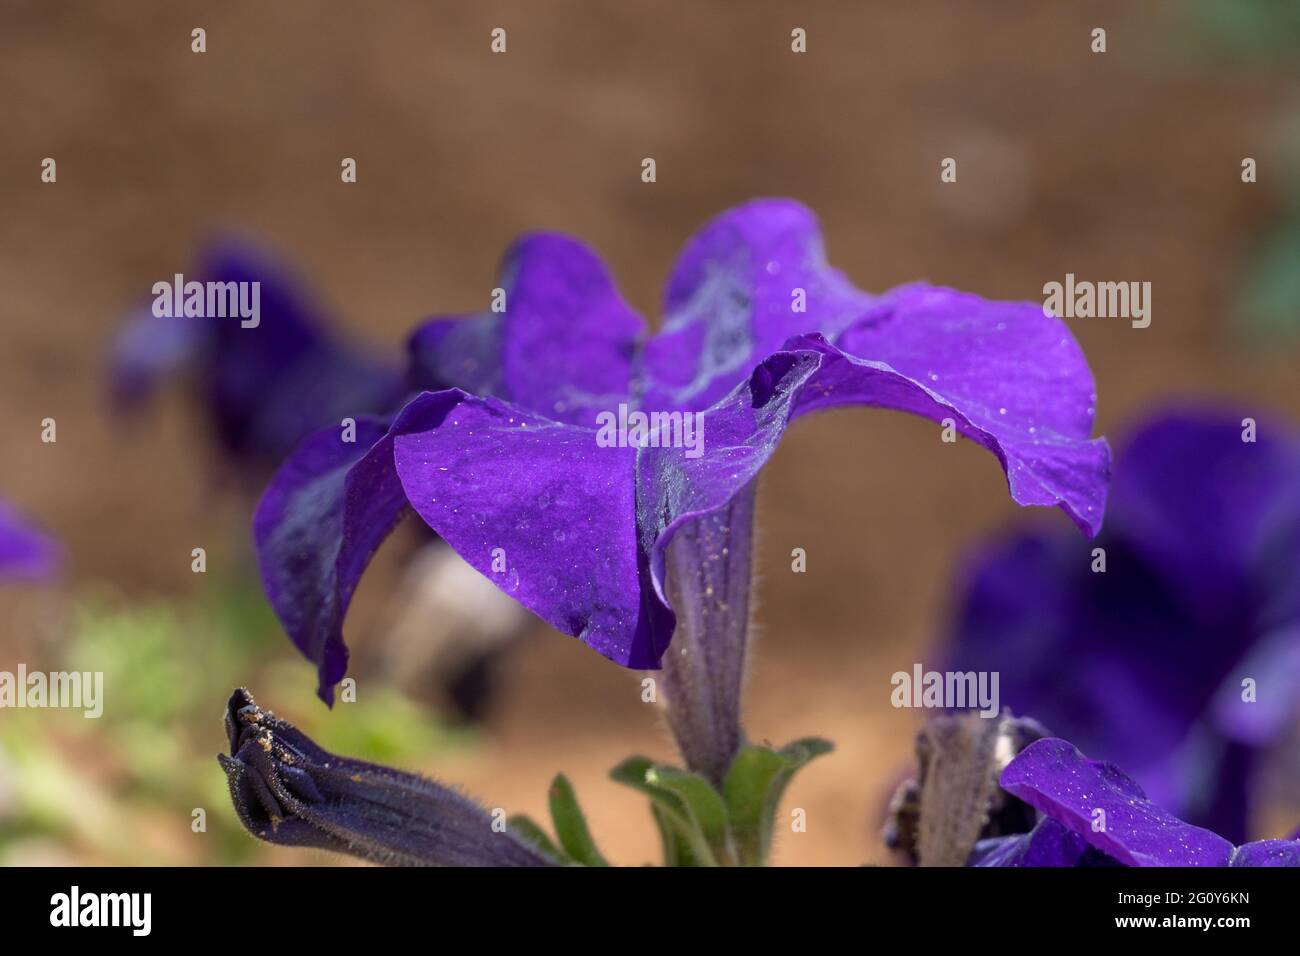 Bright purple flower side view, Wild petunia (ruellia) close up on a plant in the sunshine. Stock Photo